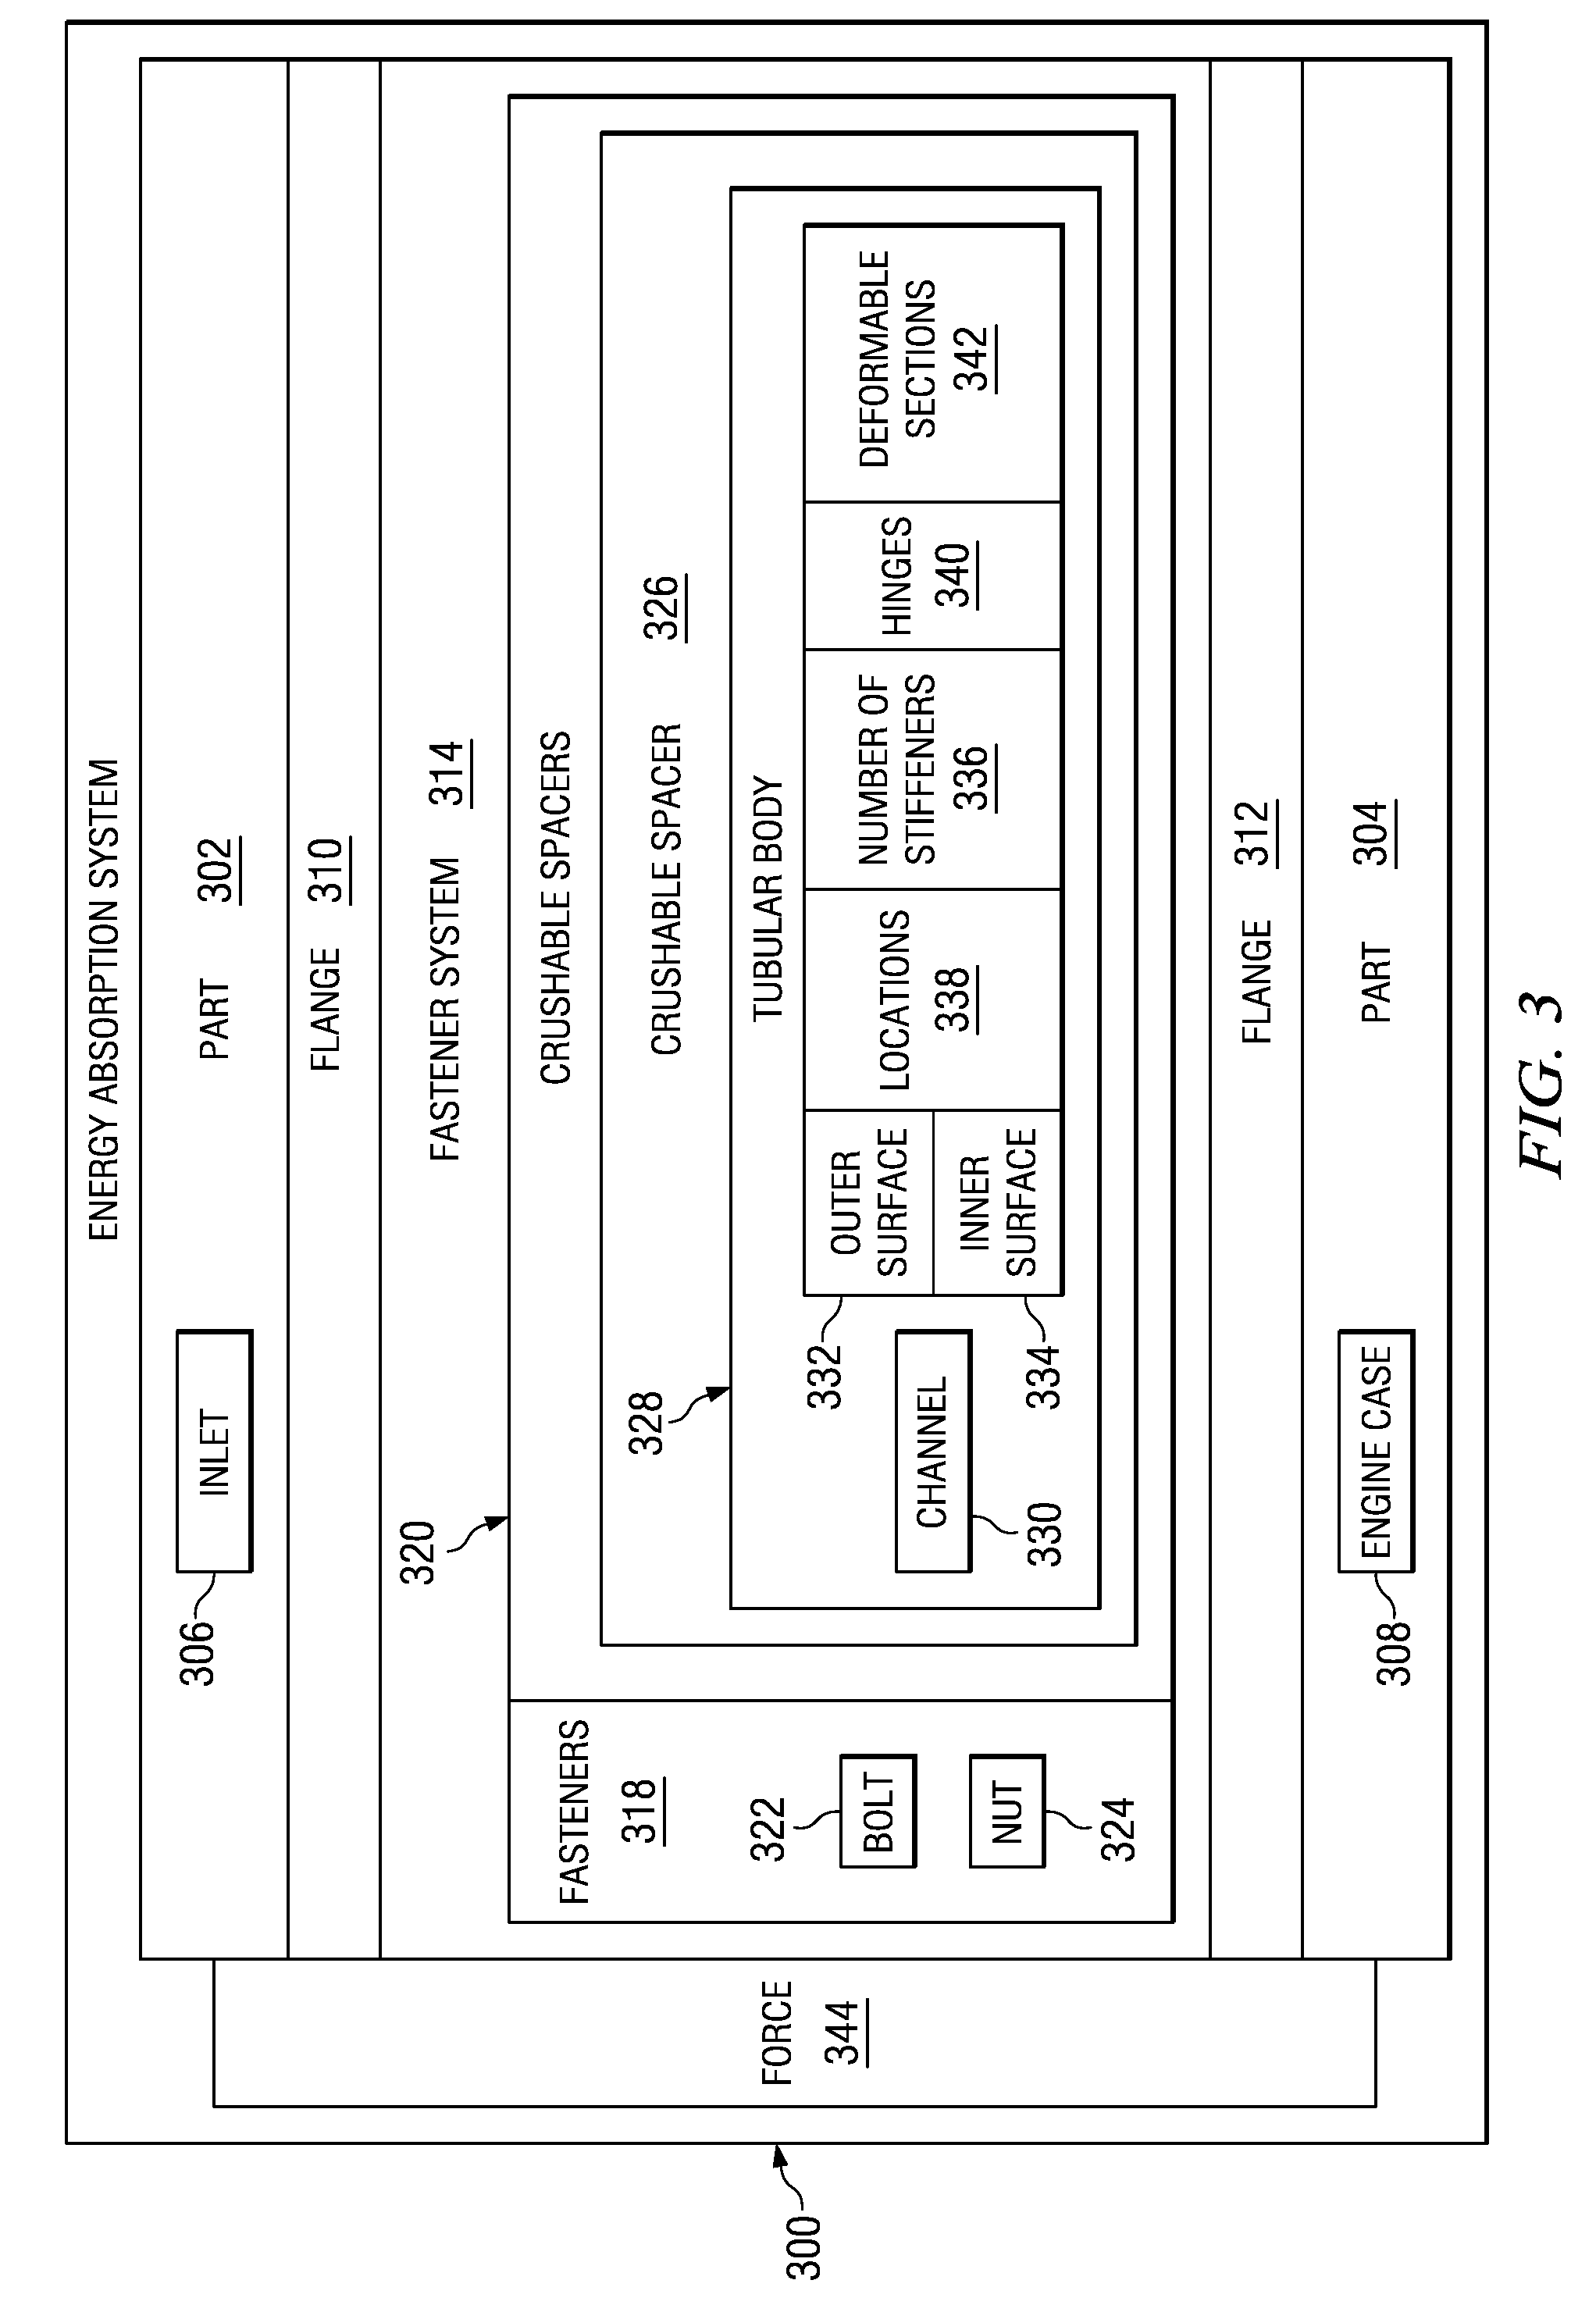 Load absorption system